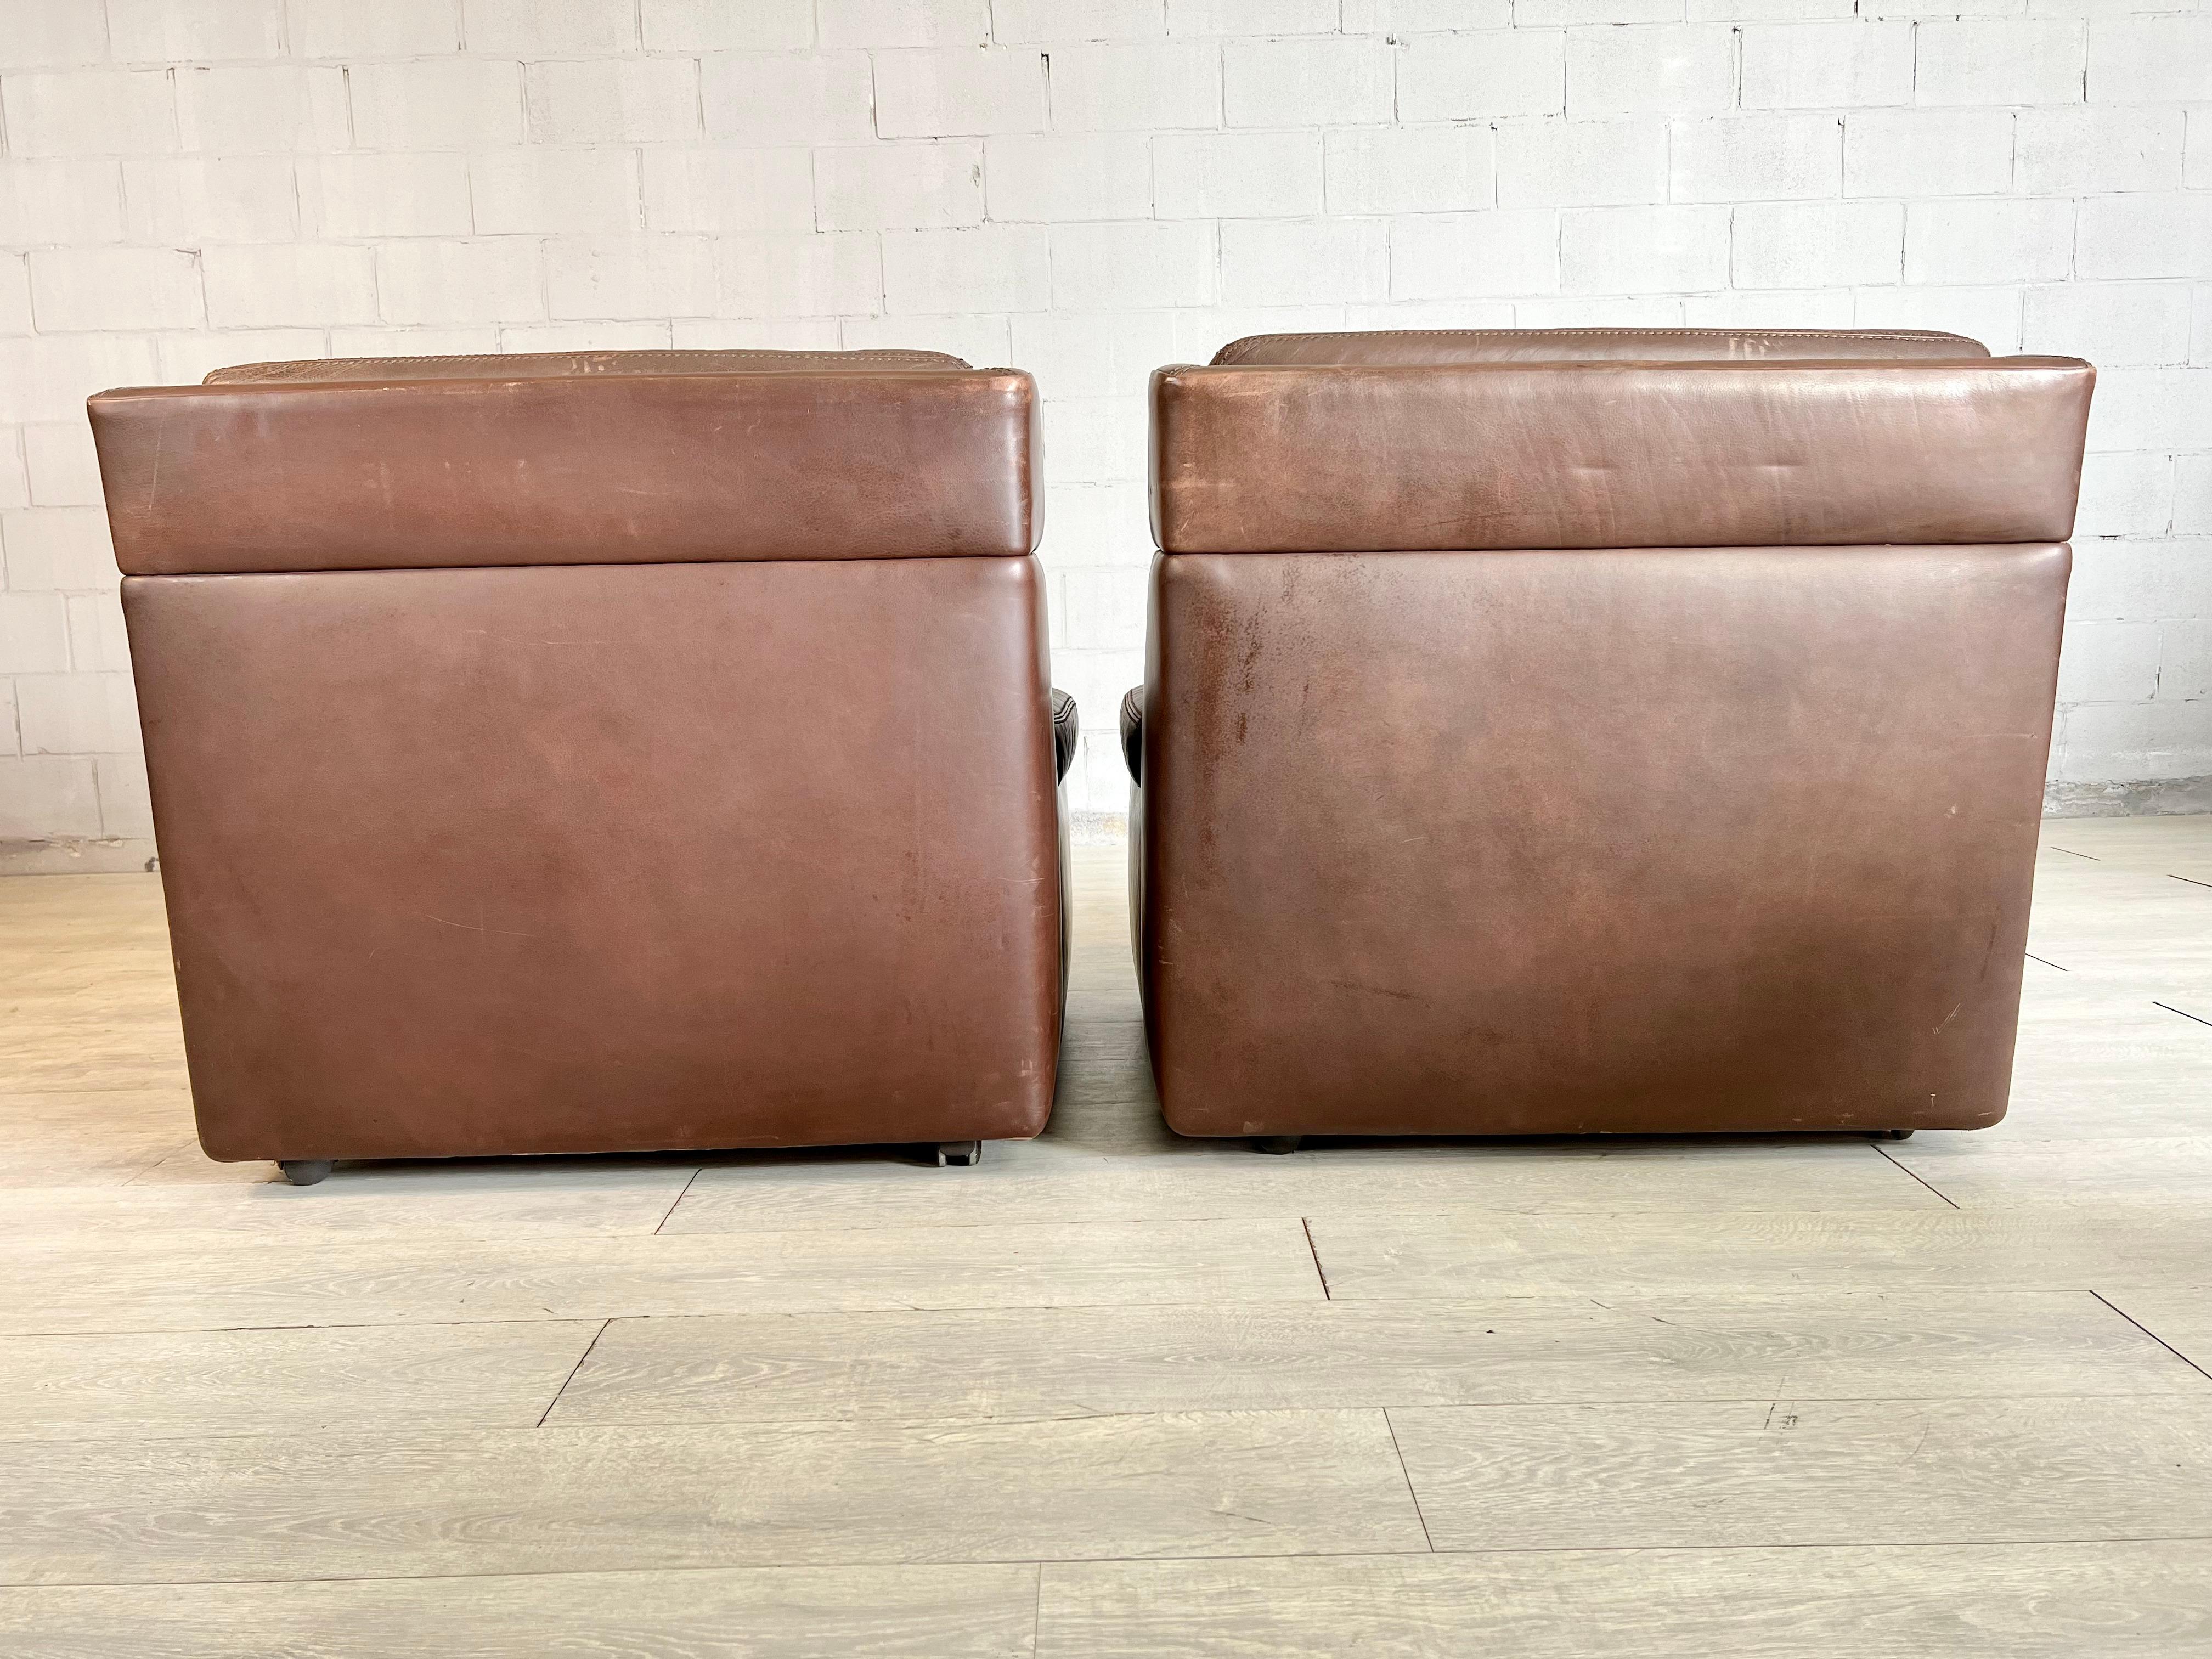 Original Vintage Modern Leather Armchairs by Durlet, Belgium, 1970s - a Pair For Sale 5